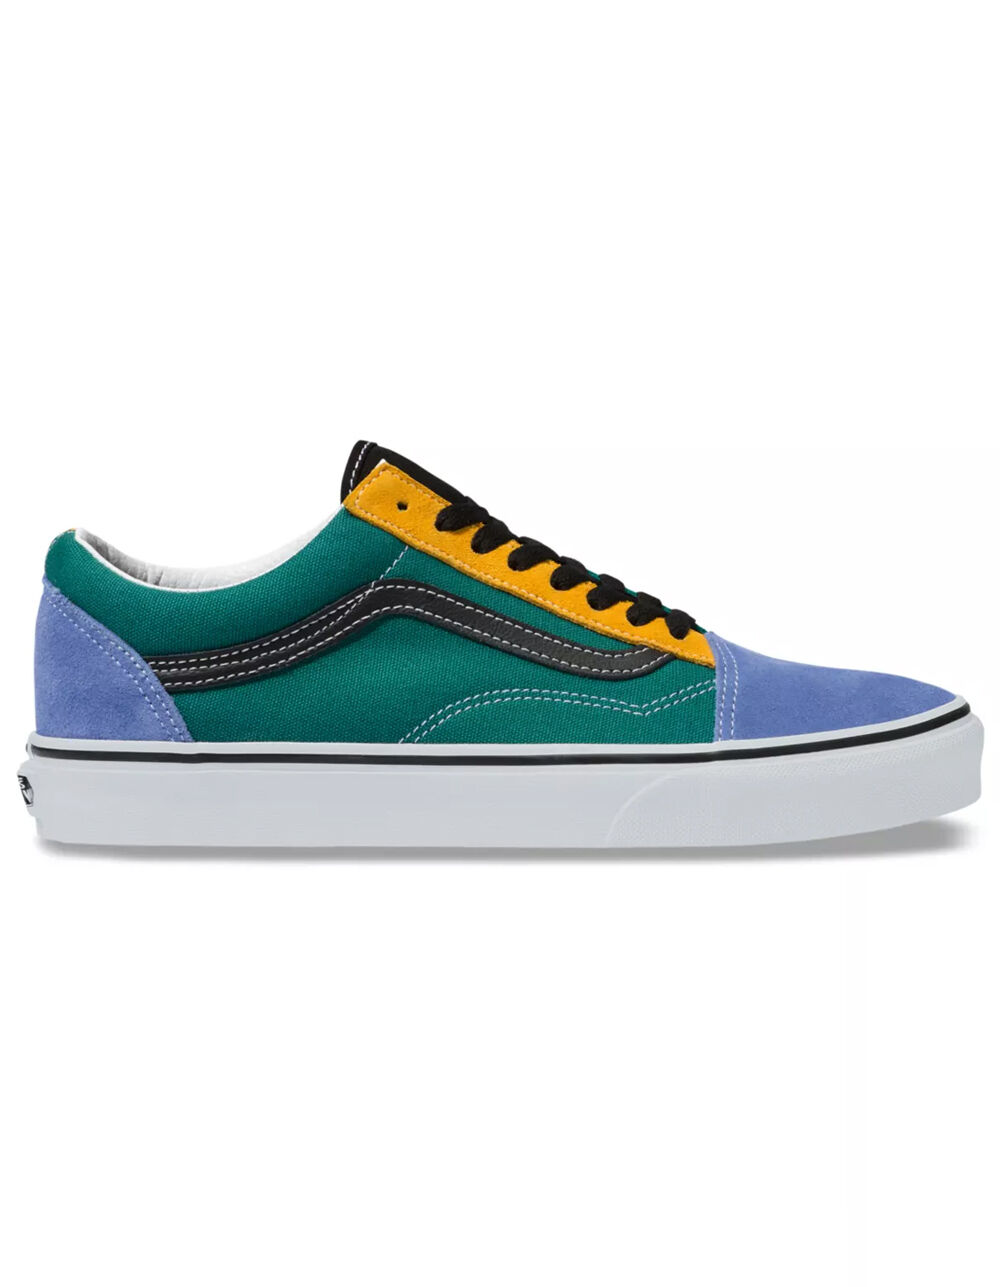 VANS Mix & Match Old Skool Cadmium Yellow & Tidepool Shoes image number 1